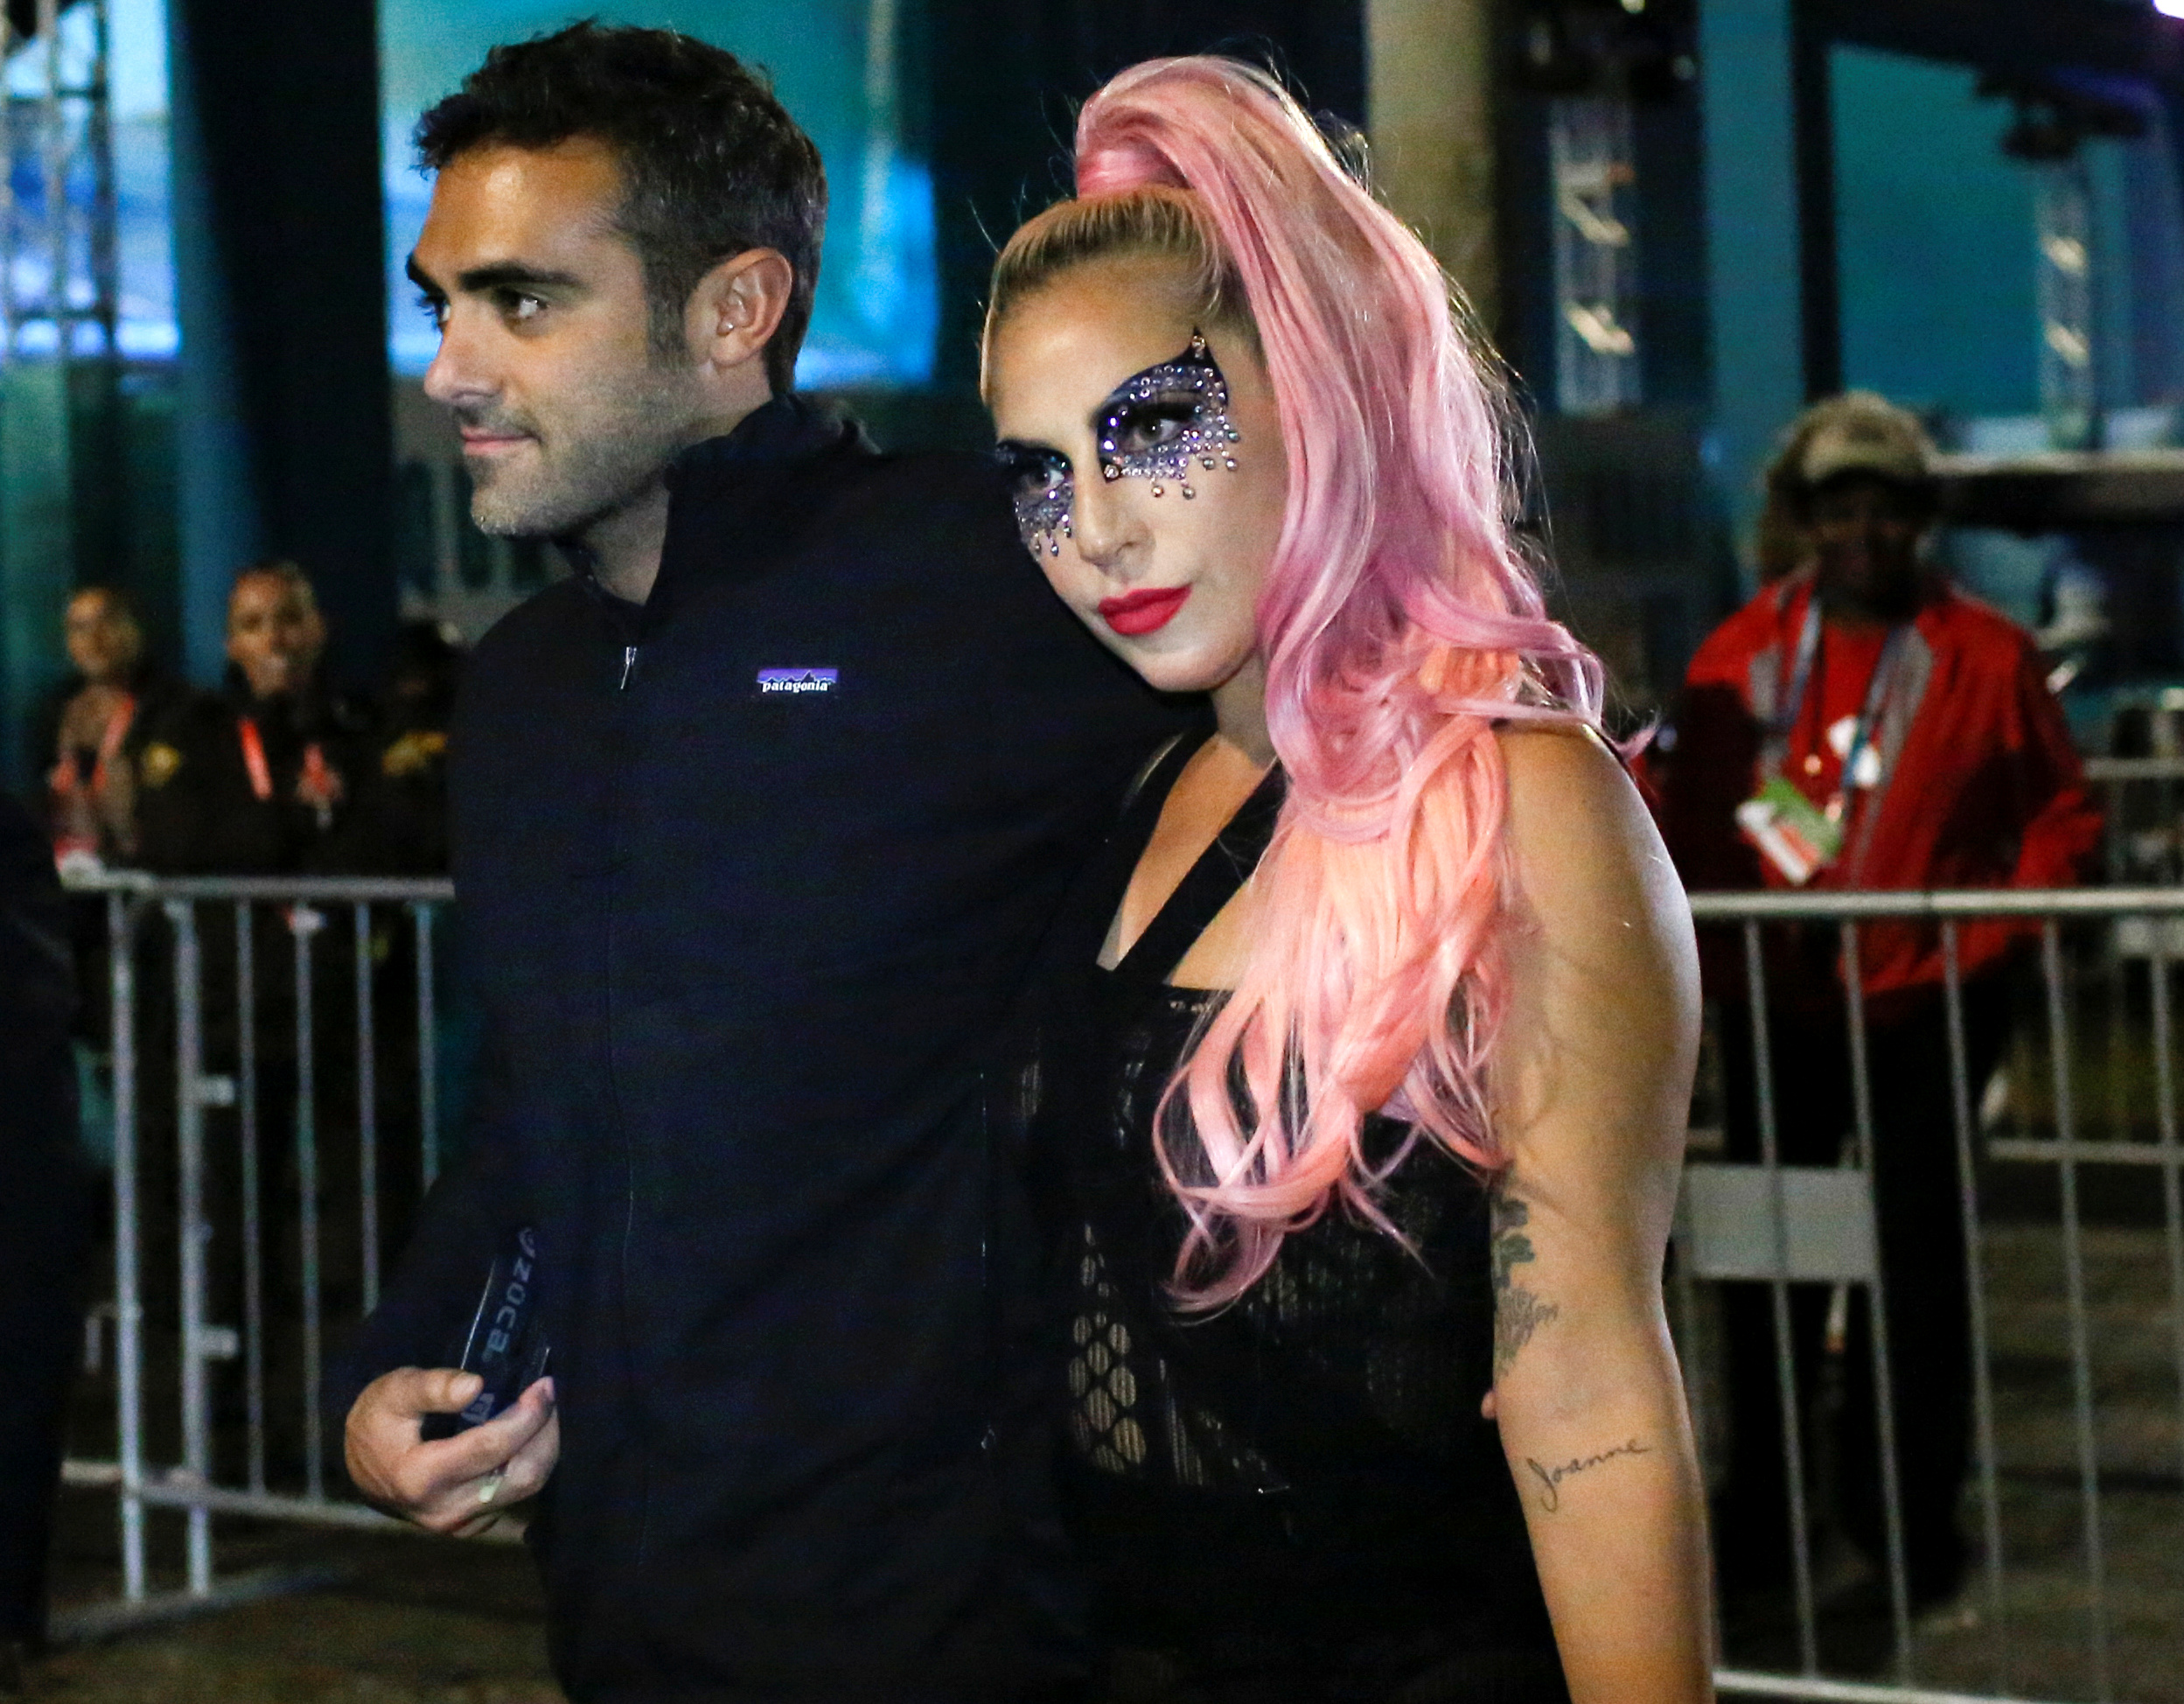 Lady Gaga and Michael Polansky attend Super Bowl LIV together at the Hard Rock Stadium in Miami, Florida, on February 2, 2020